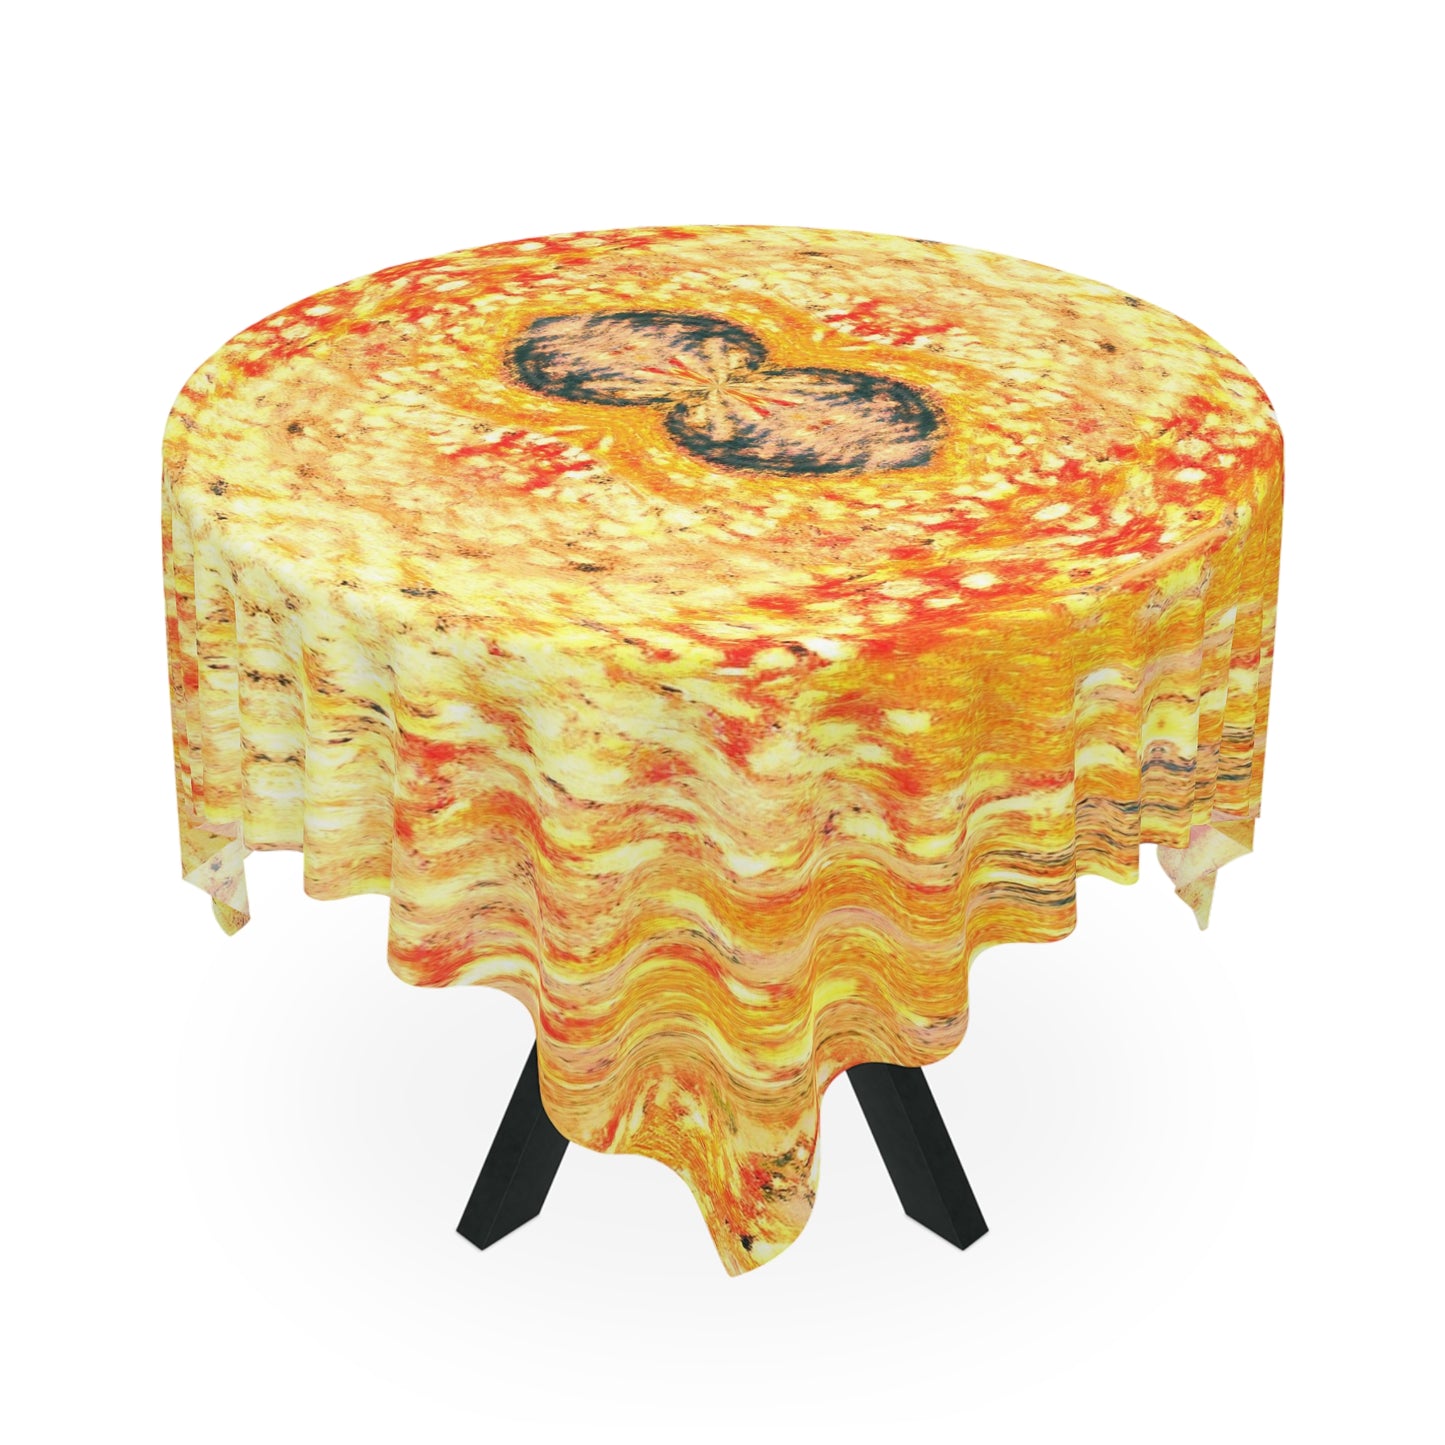 Fire Spirits 55-inch Square Tablecloth